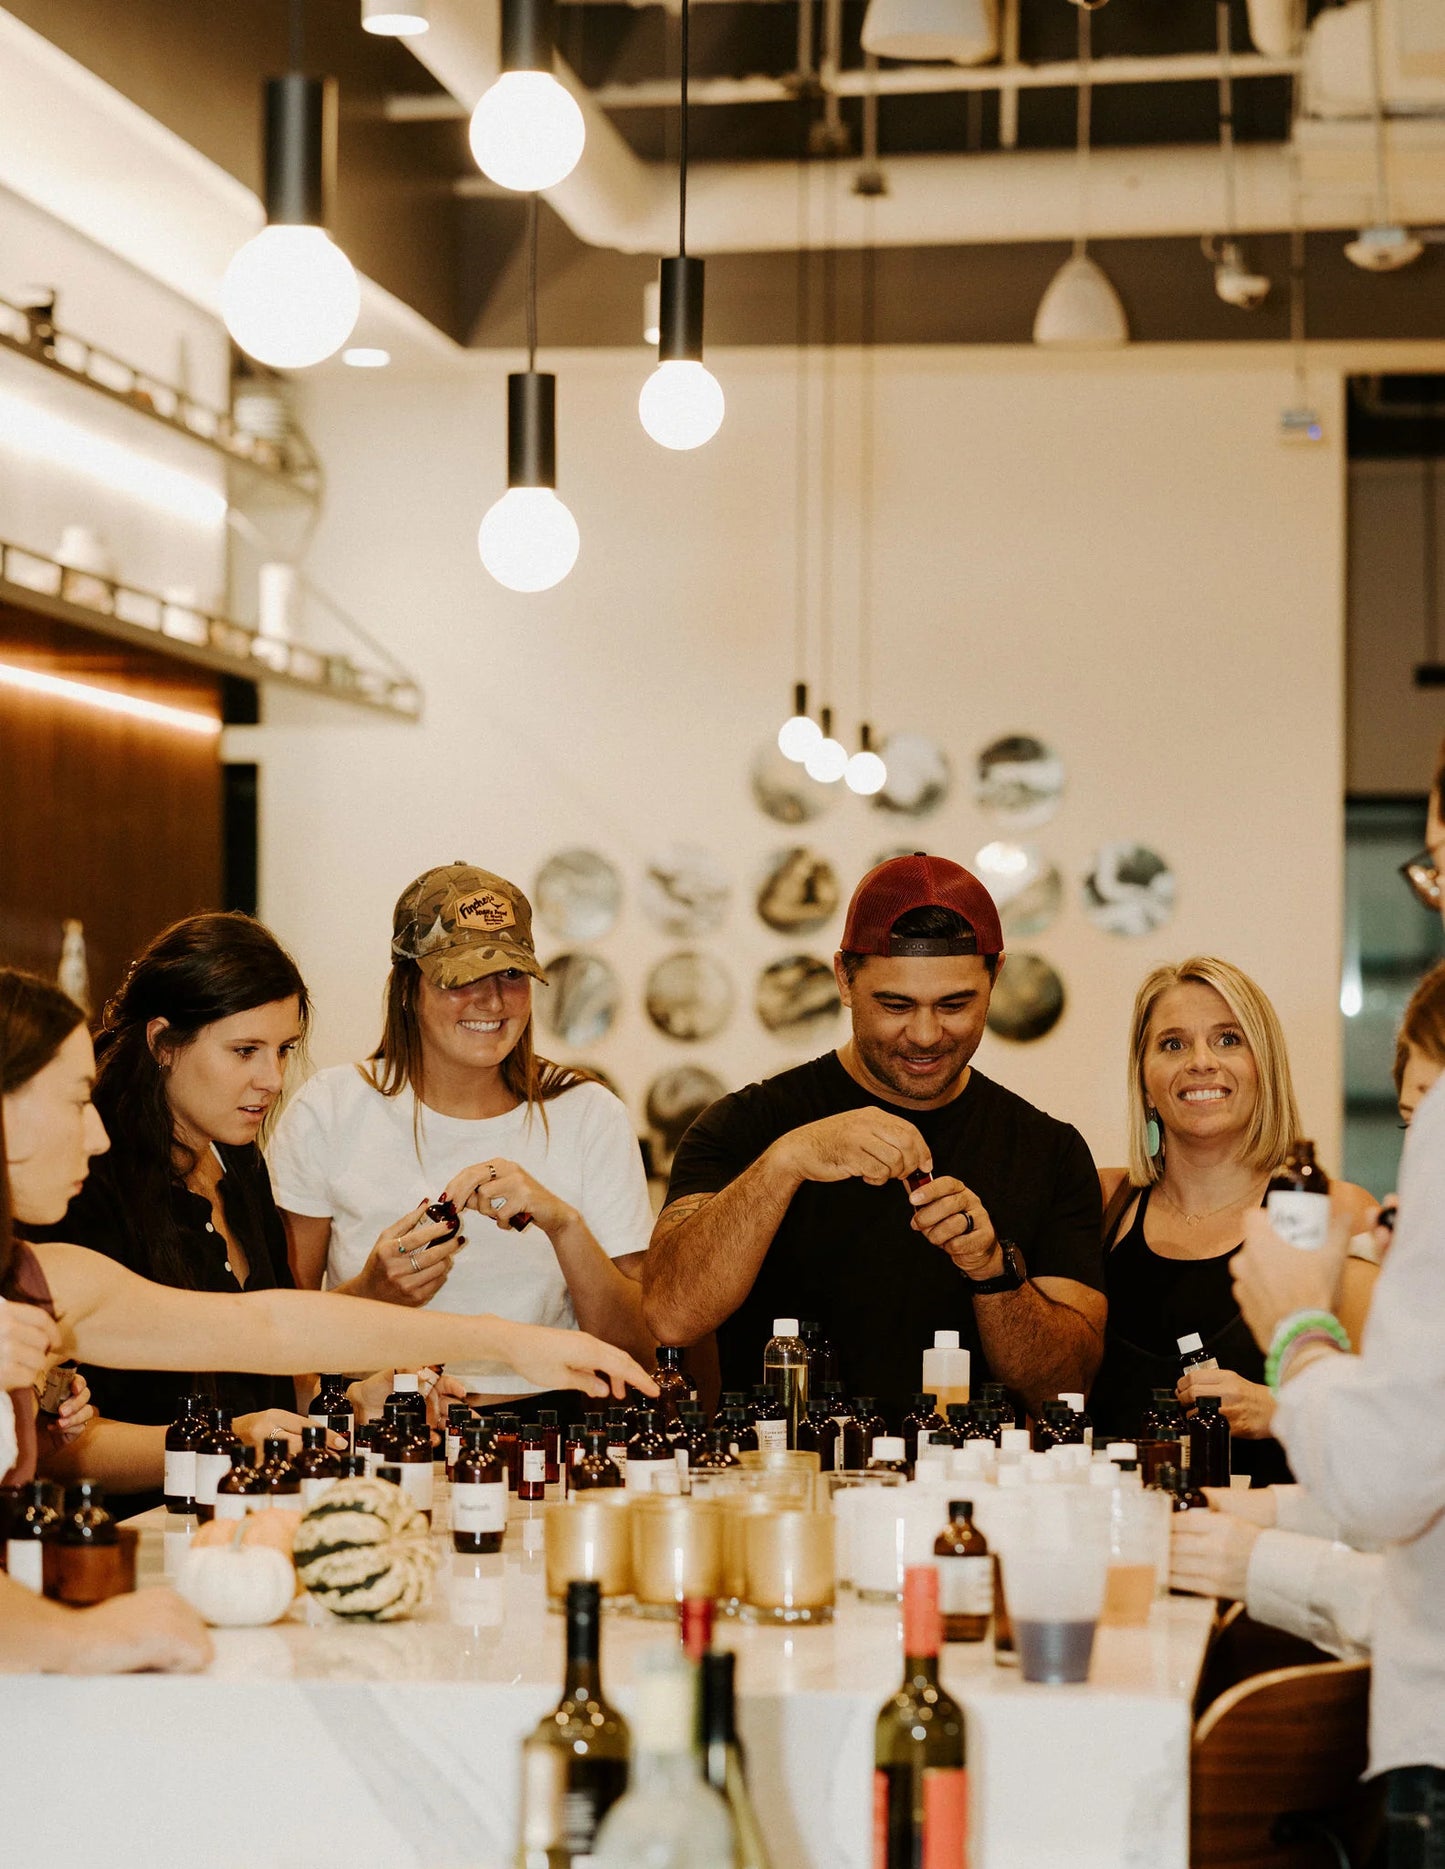 The Candle Making Experience: Orlando, FL [Fri. 6/21, 7-9PM] - Community Candle Co.